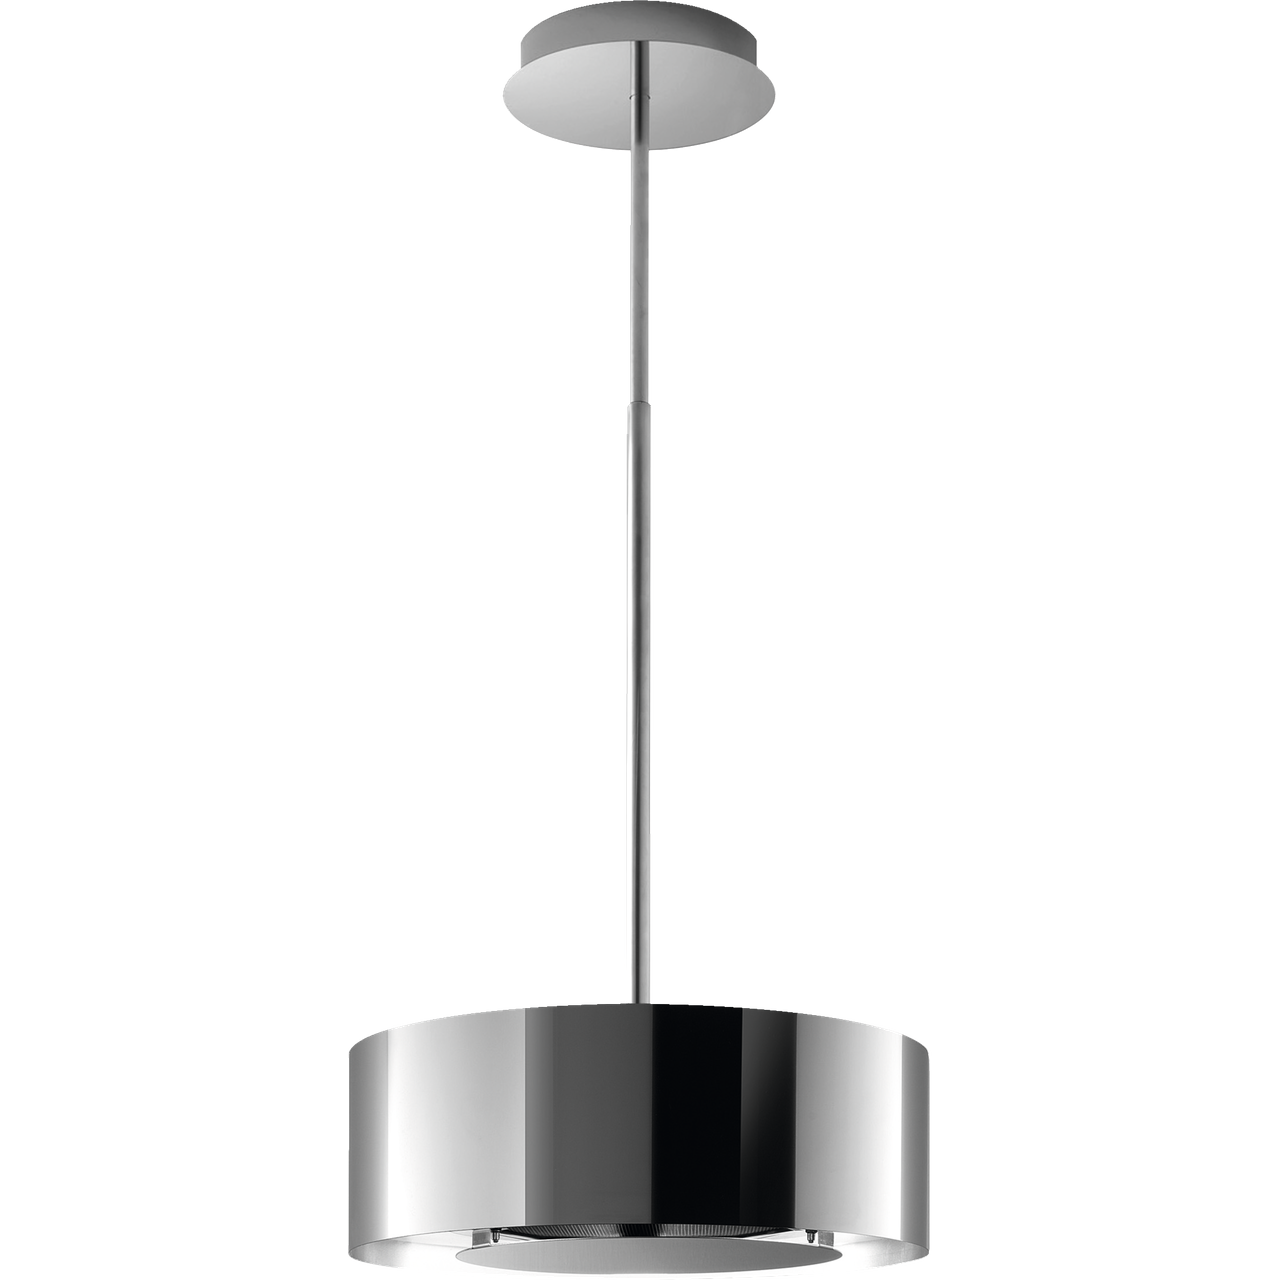 AEG DLE0431M Island Cooker Hood Review